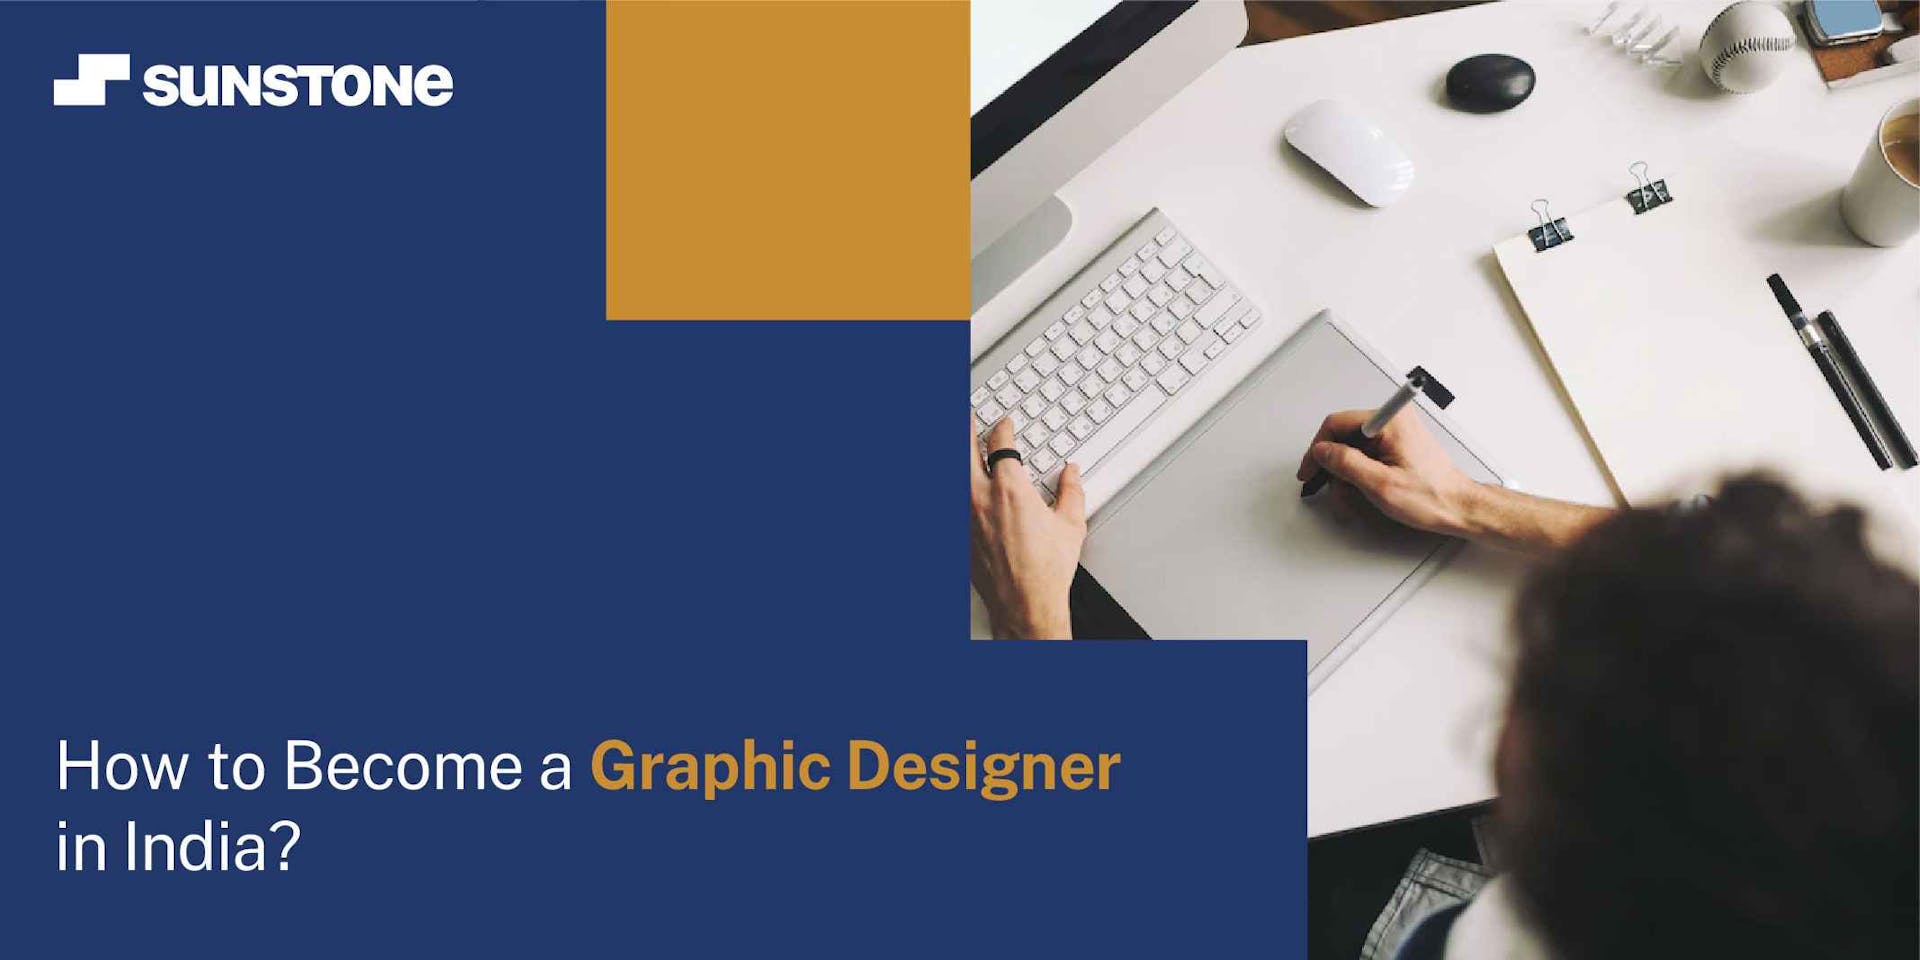 How to become a graphic designer in India